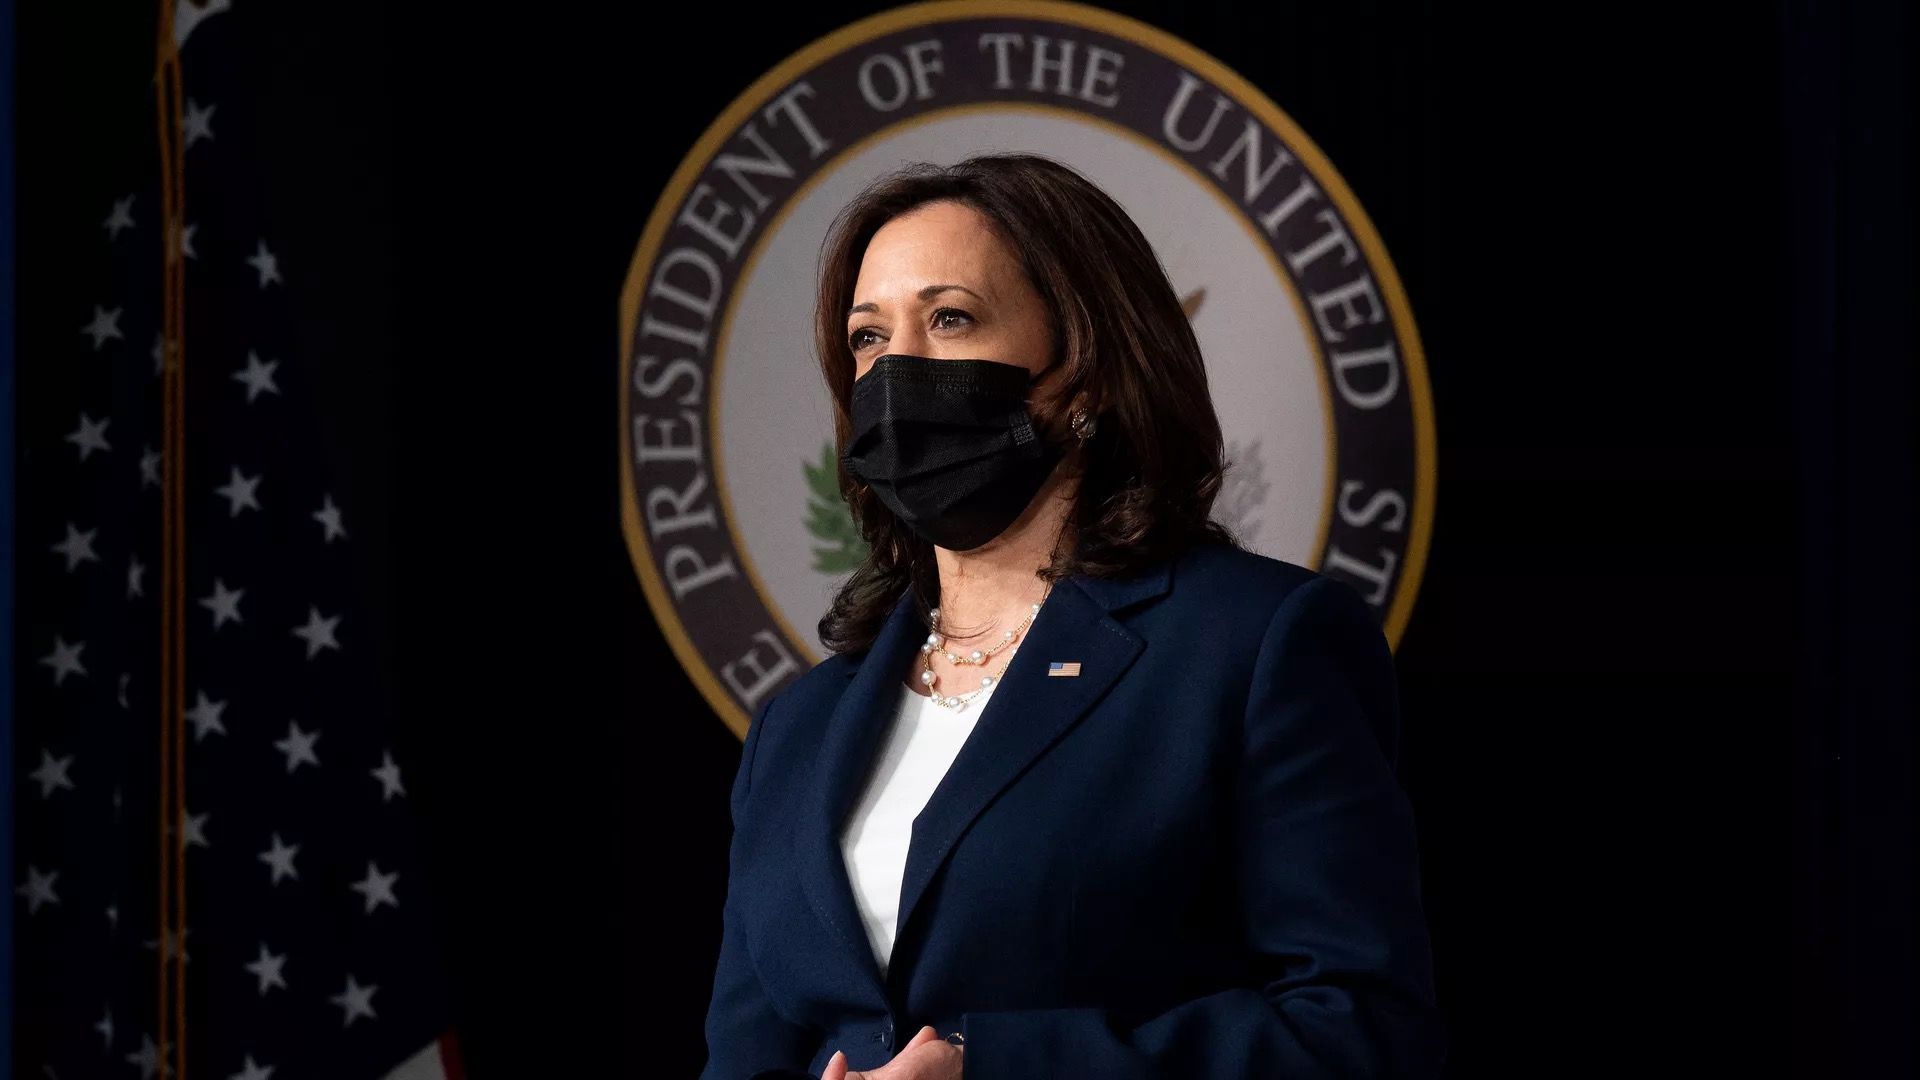 Vice President Kamala Harris is seen against a backdrop of the presidential seal.